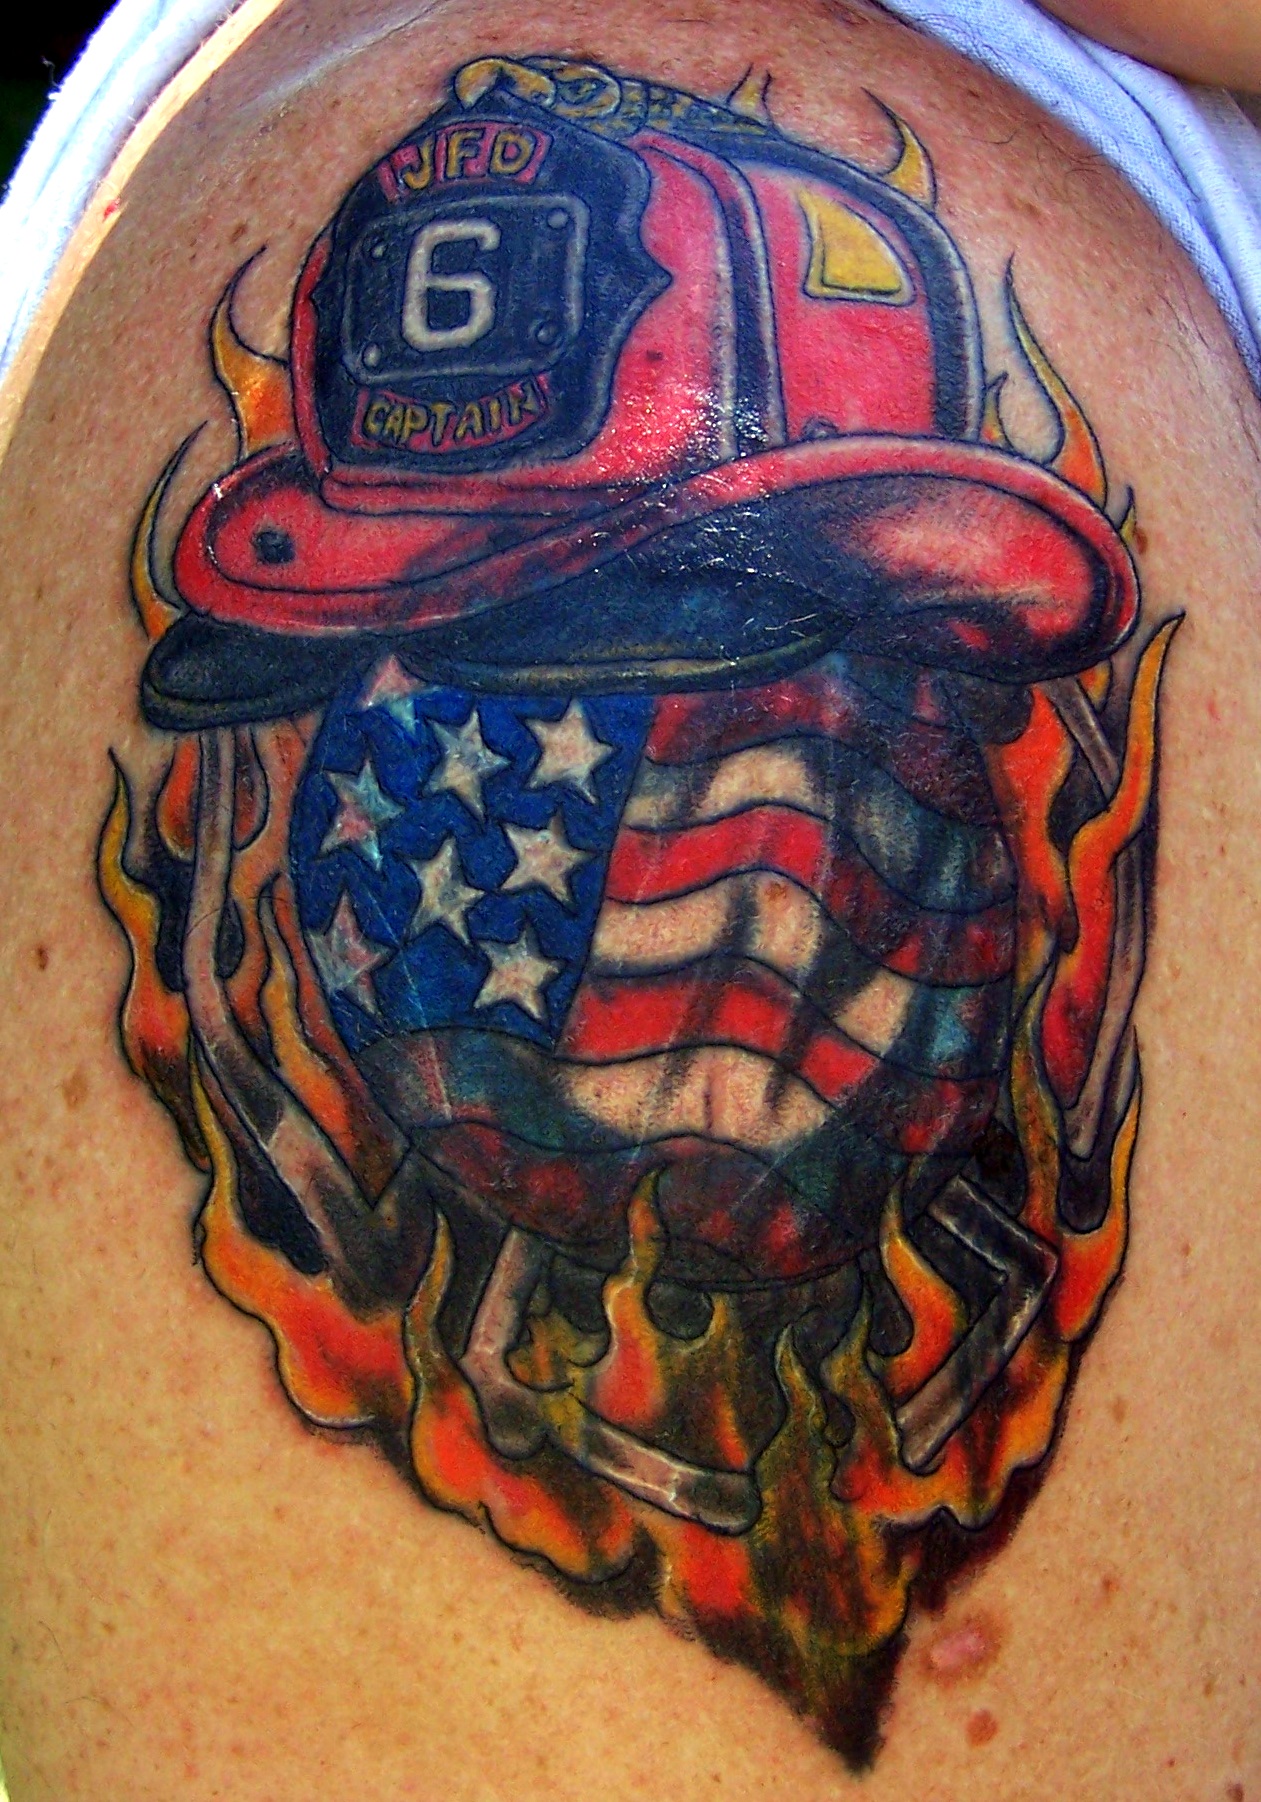 USA Flag With Firefighter Helmet In Flame Tattoo On Shoulder